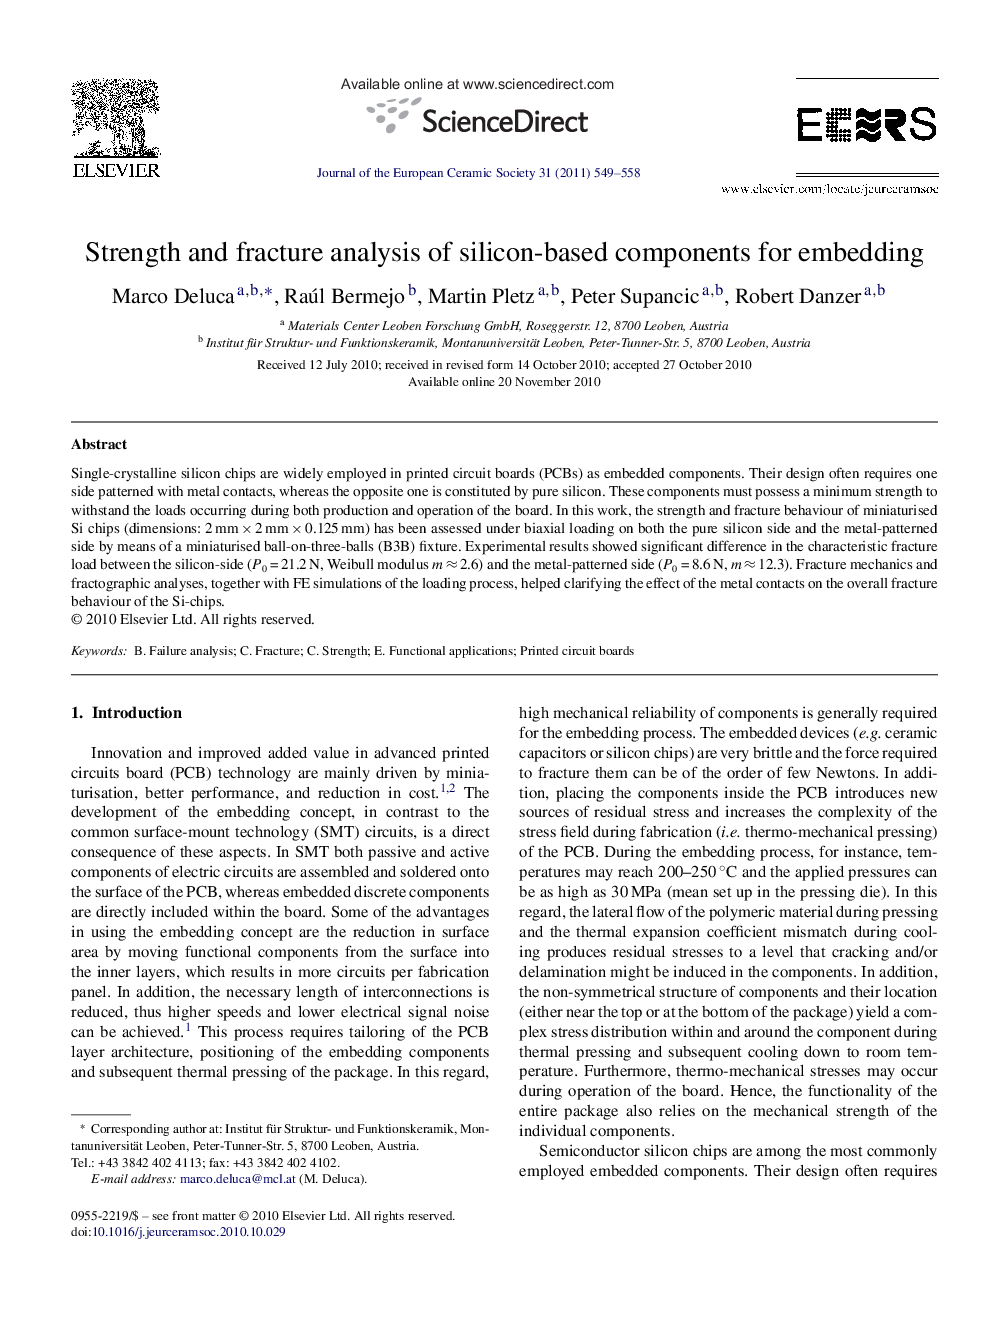 Strength and fracture analysis of silicon-based components for embedding